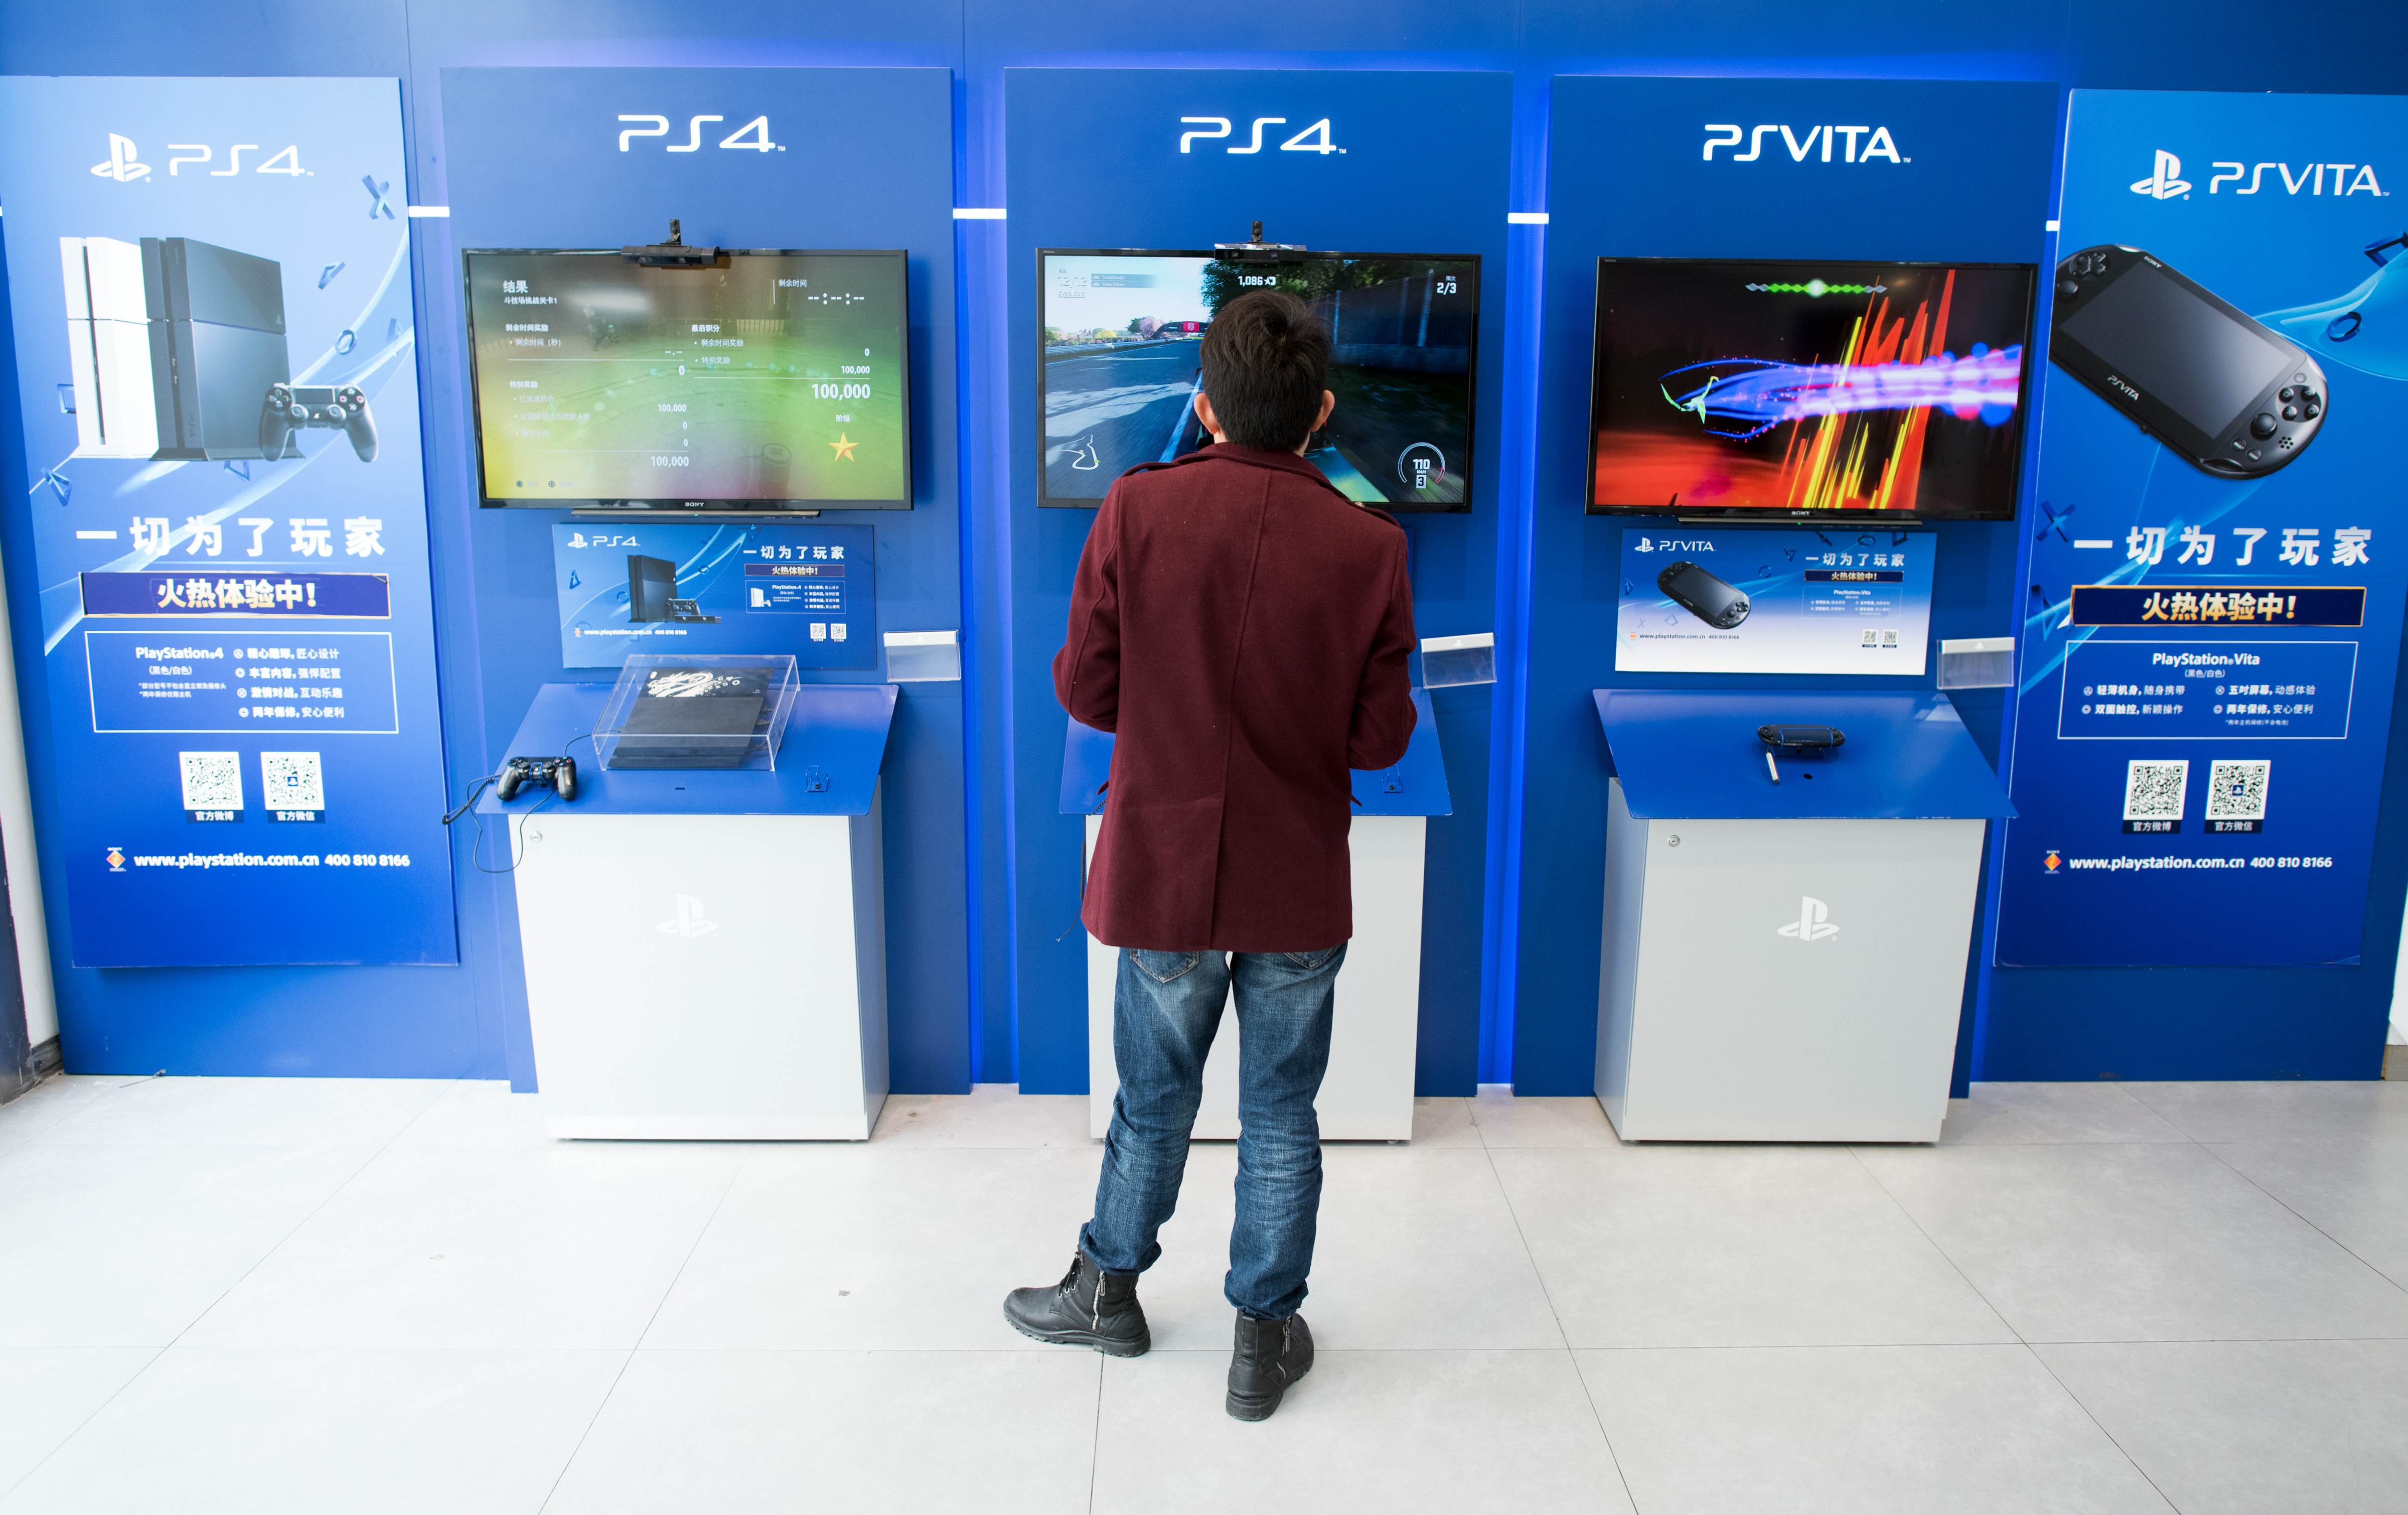 PS4 Games / PlayStation 4 Video Games, Le Vend Online